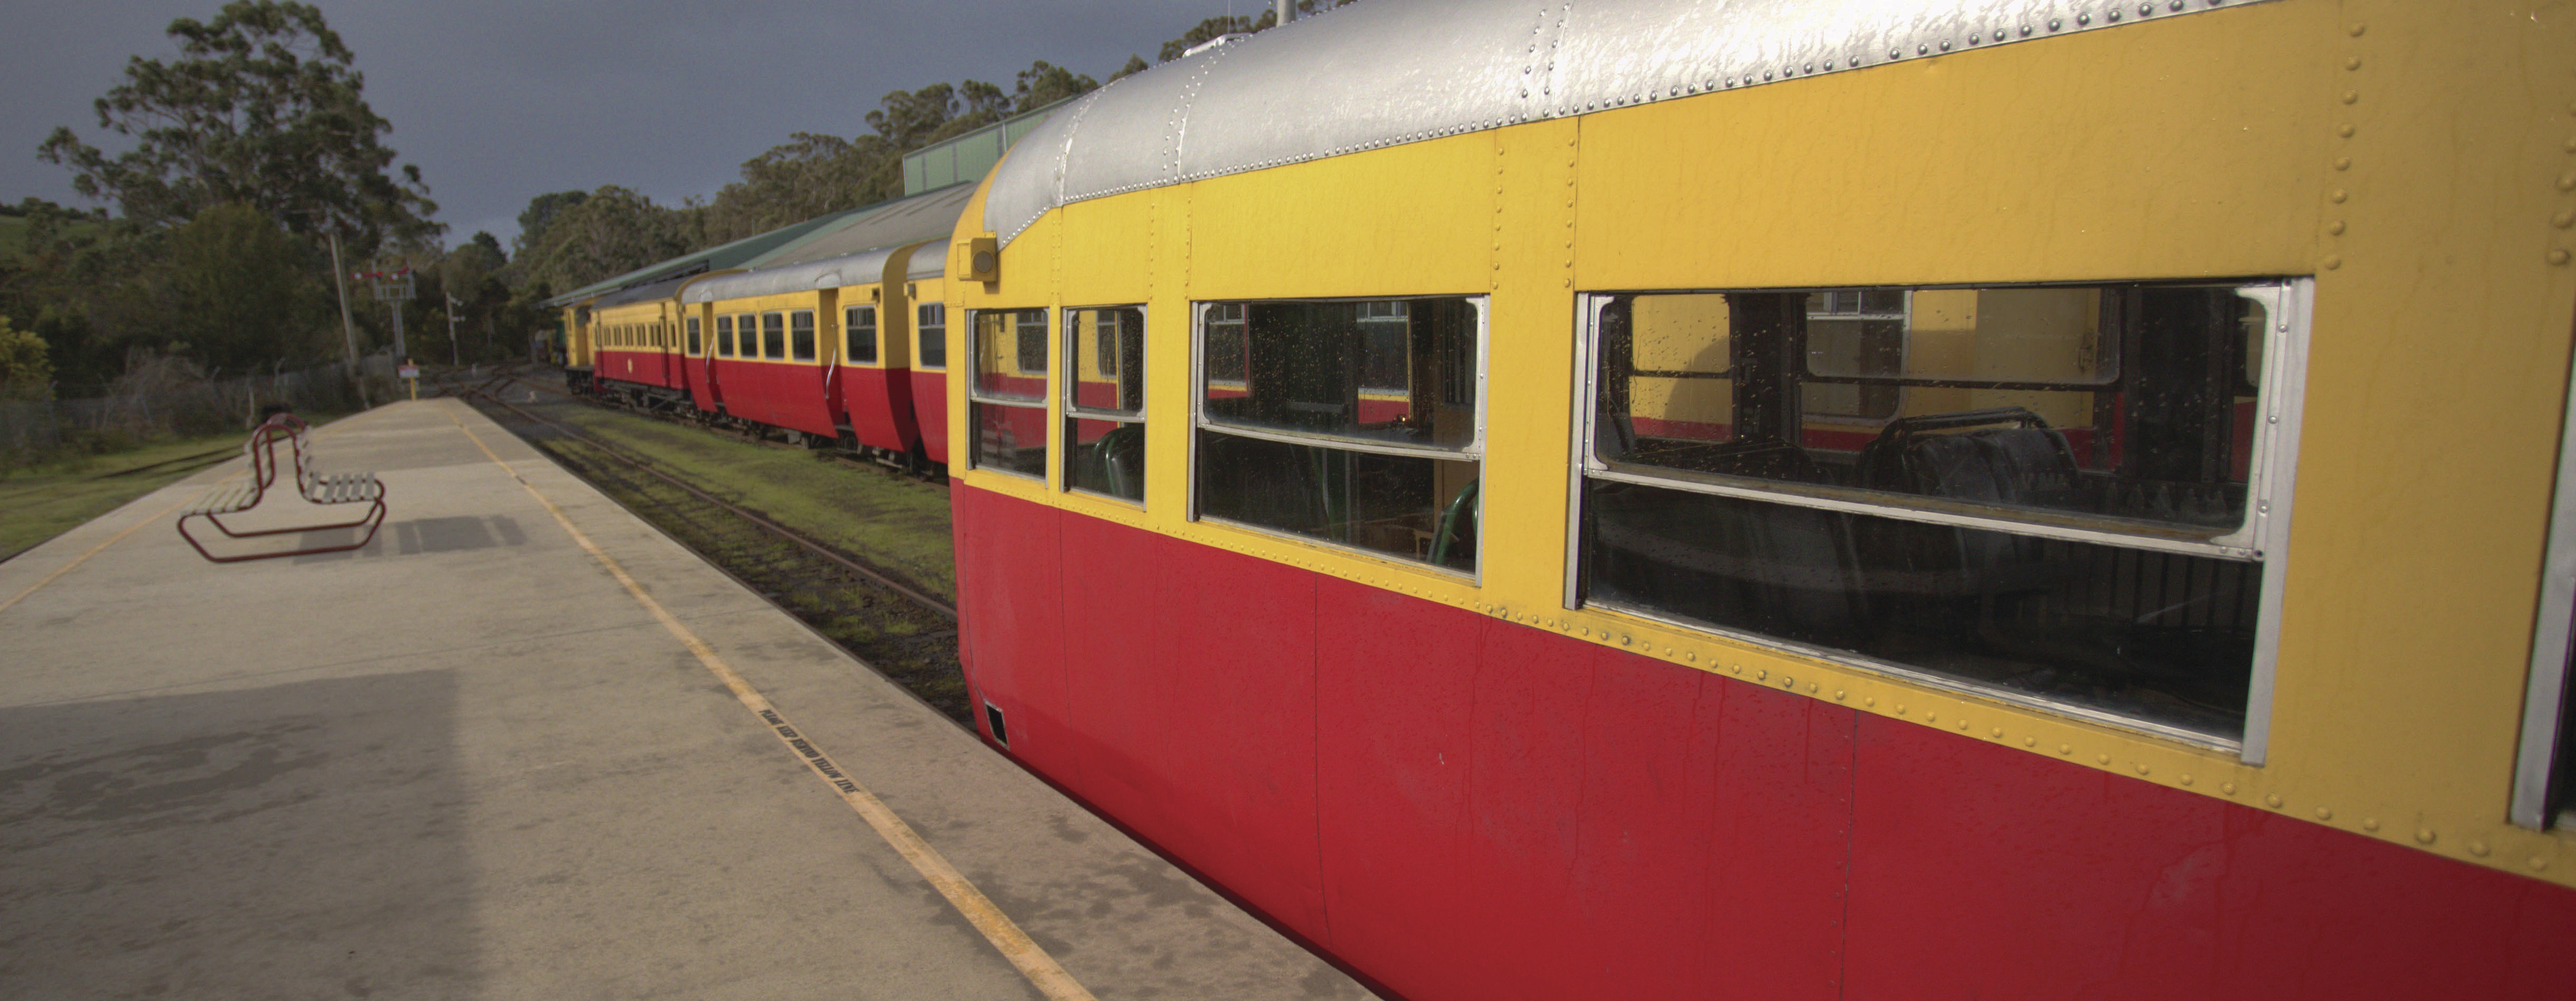 Image of a vintage red and yellow carriage at a platform at the Don River Railway and museum in Don, a suburb of Devonport.